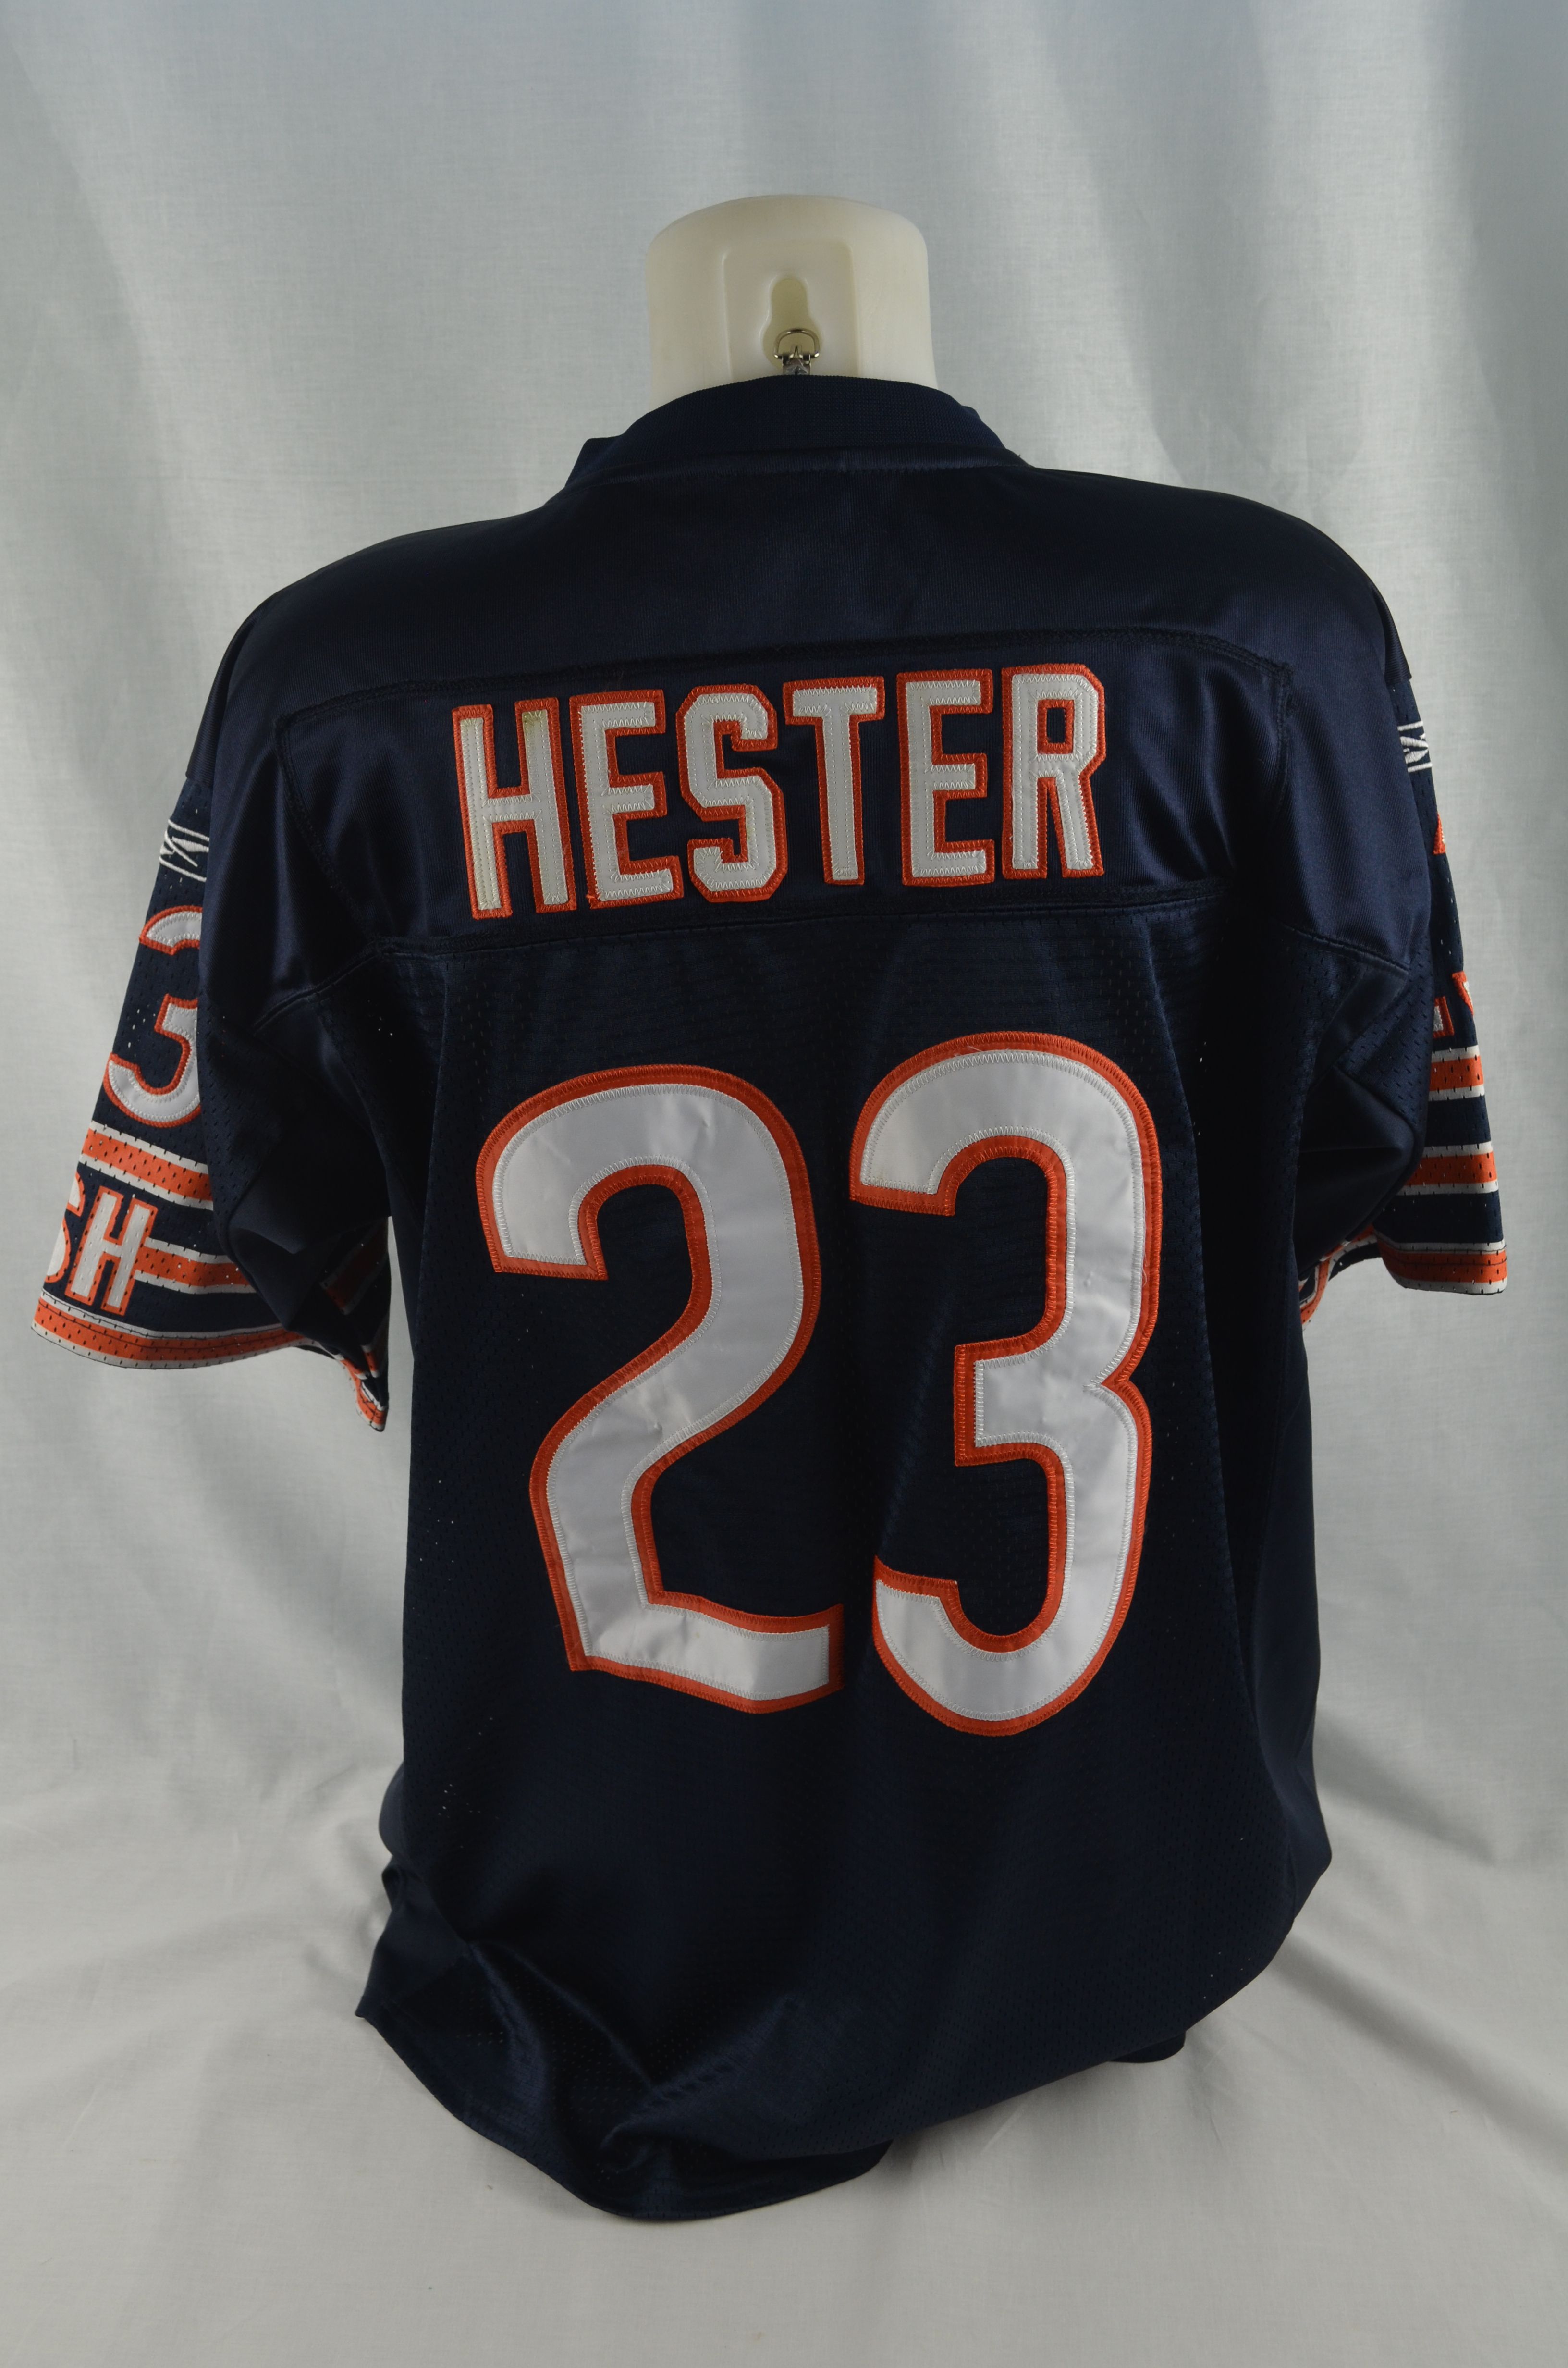 Devin Hester Signed Autographed Blue Football Stat Jersey with JSA  Certificate of Authenticity - Chicago Great - Size XL